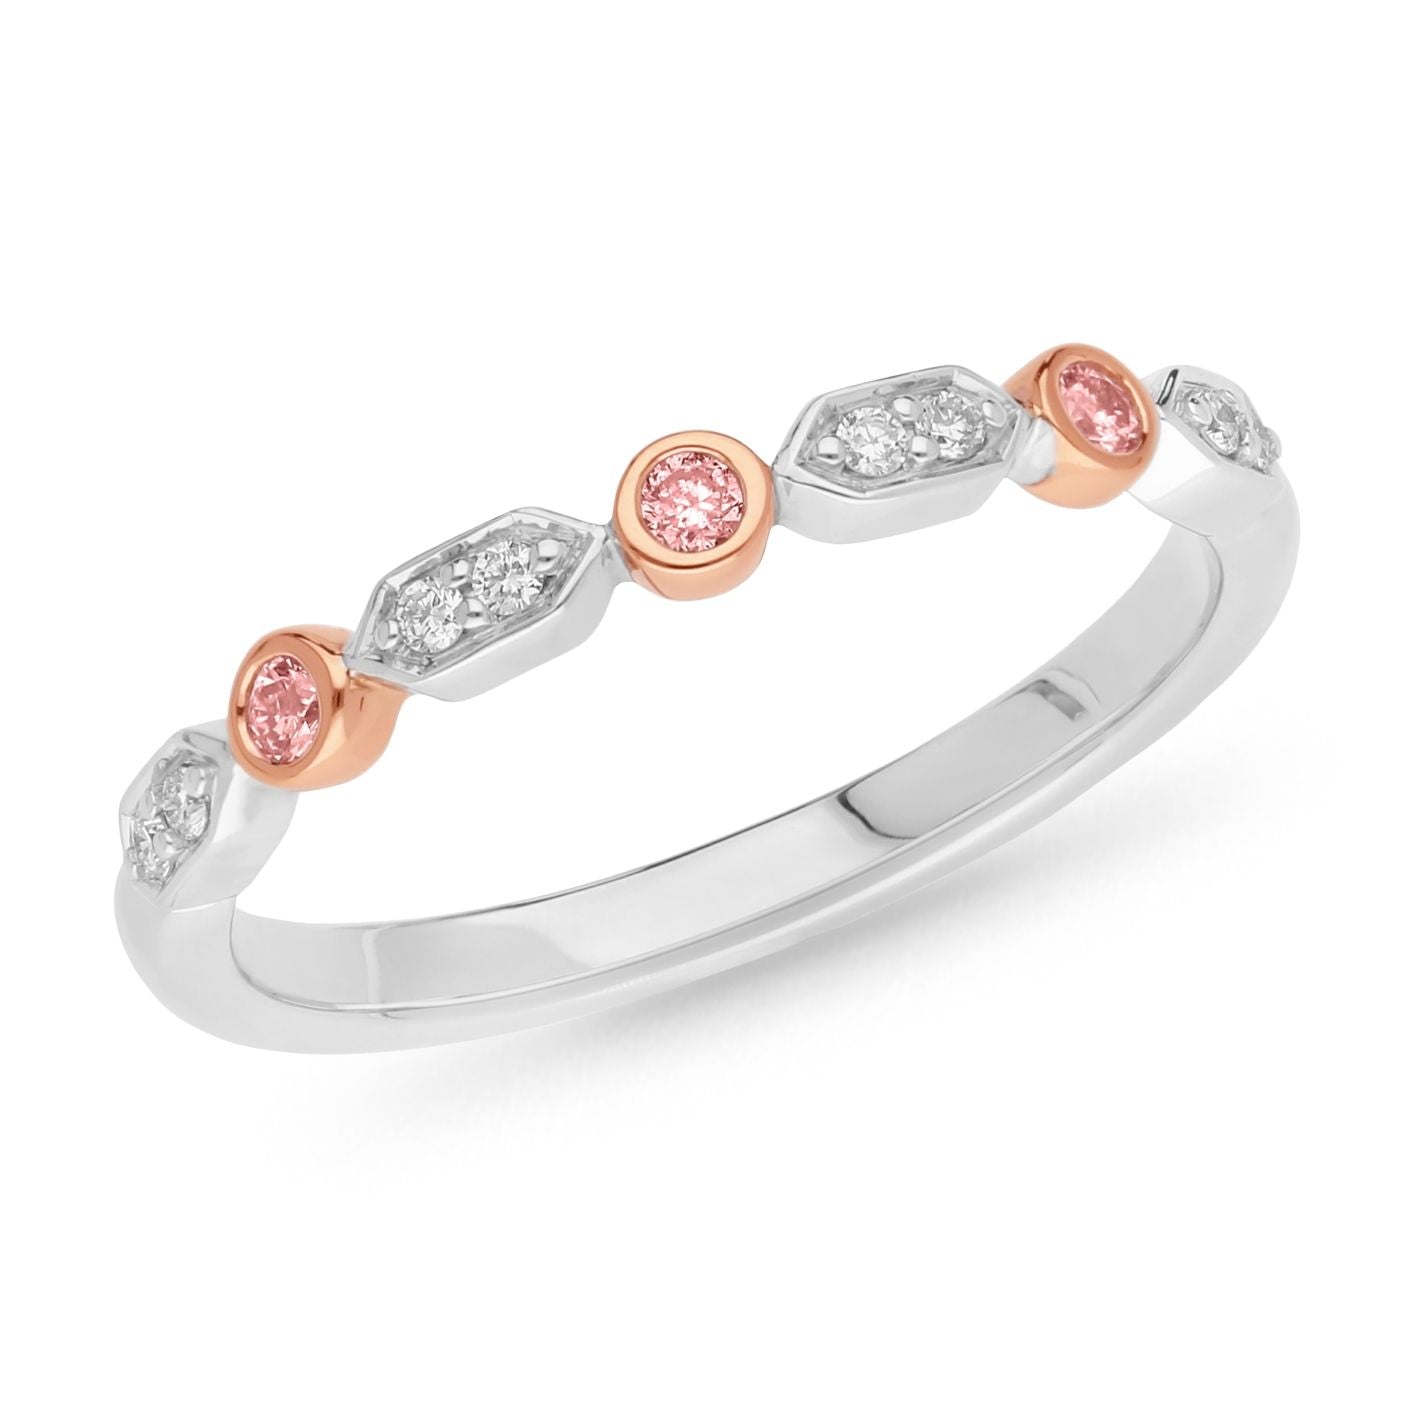 9ct Two Tone Pink and White Diamond Ring